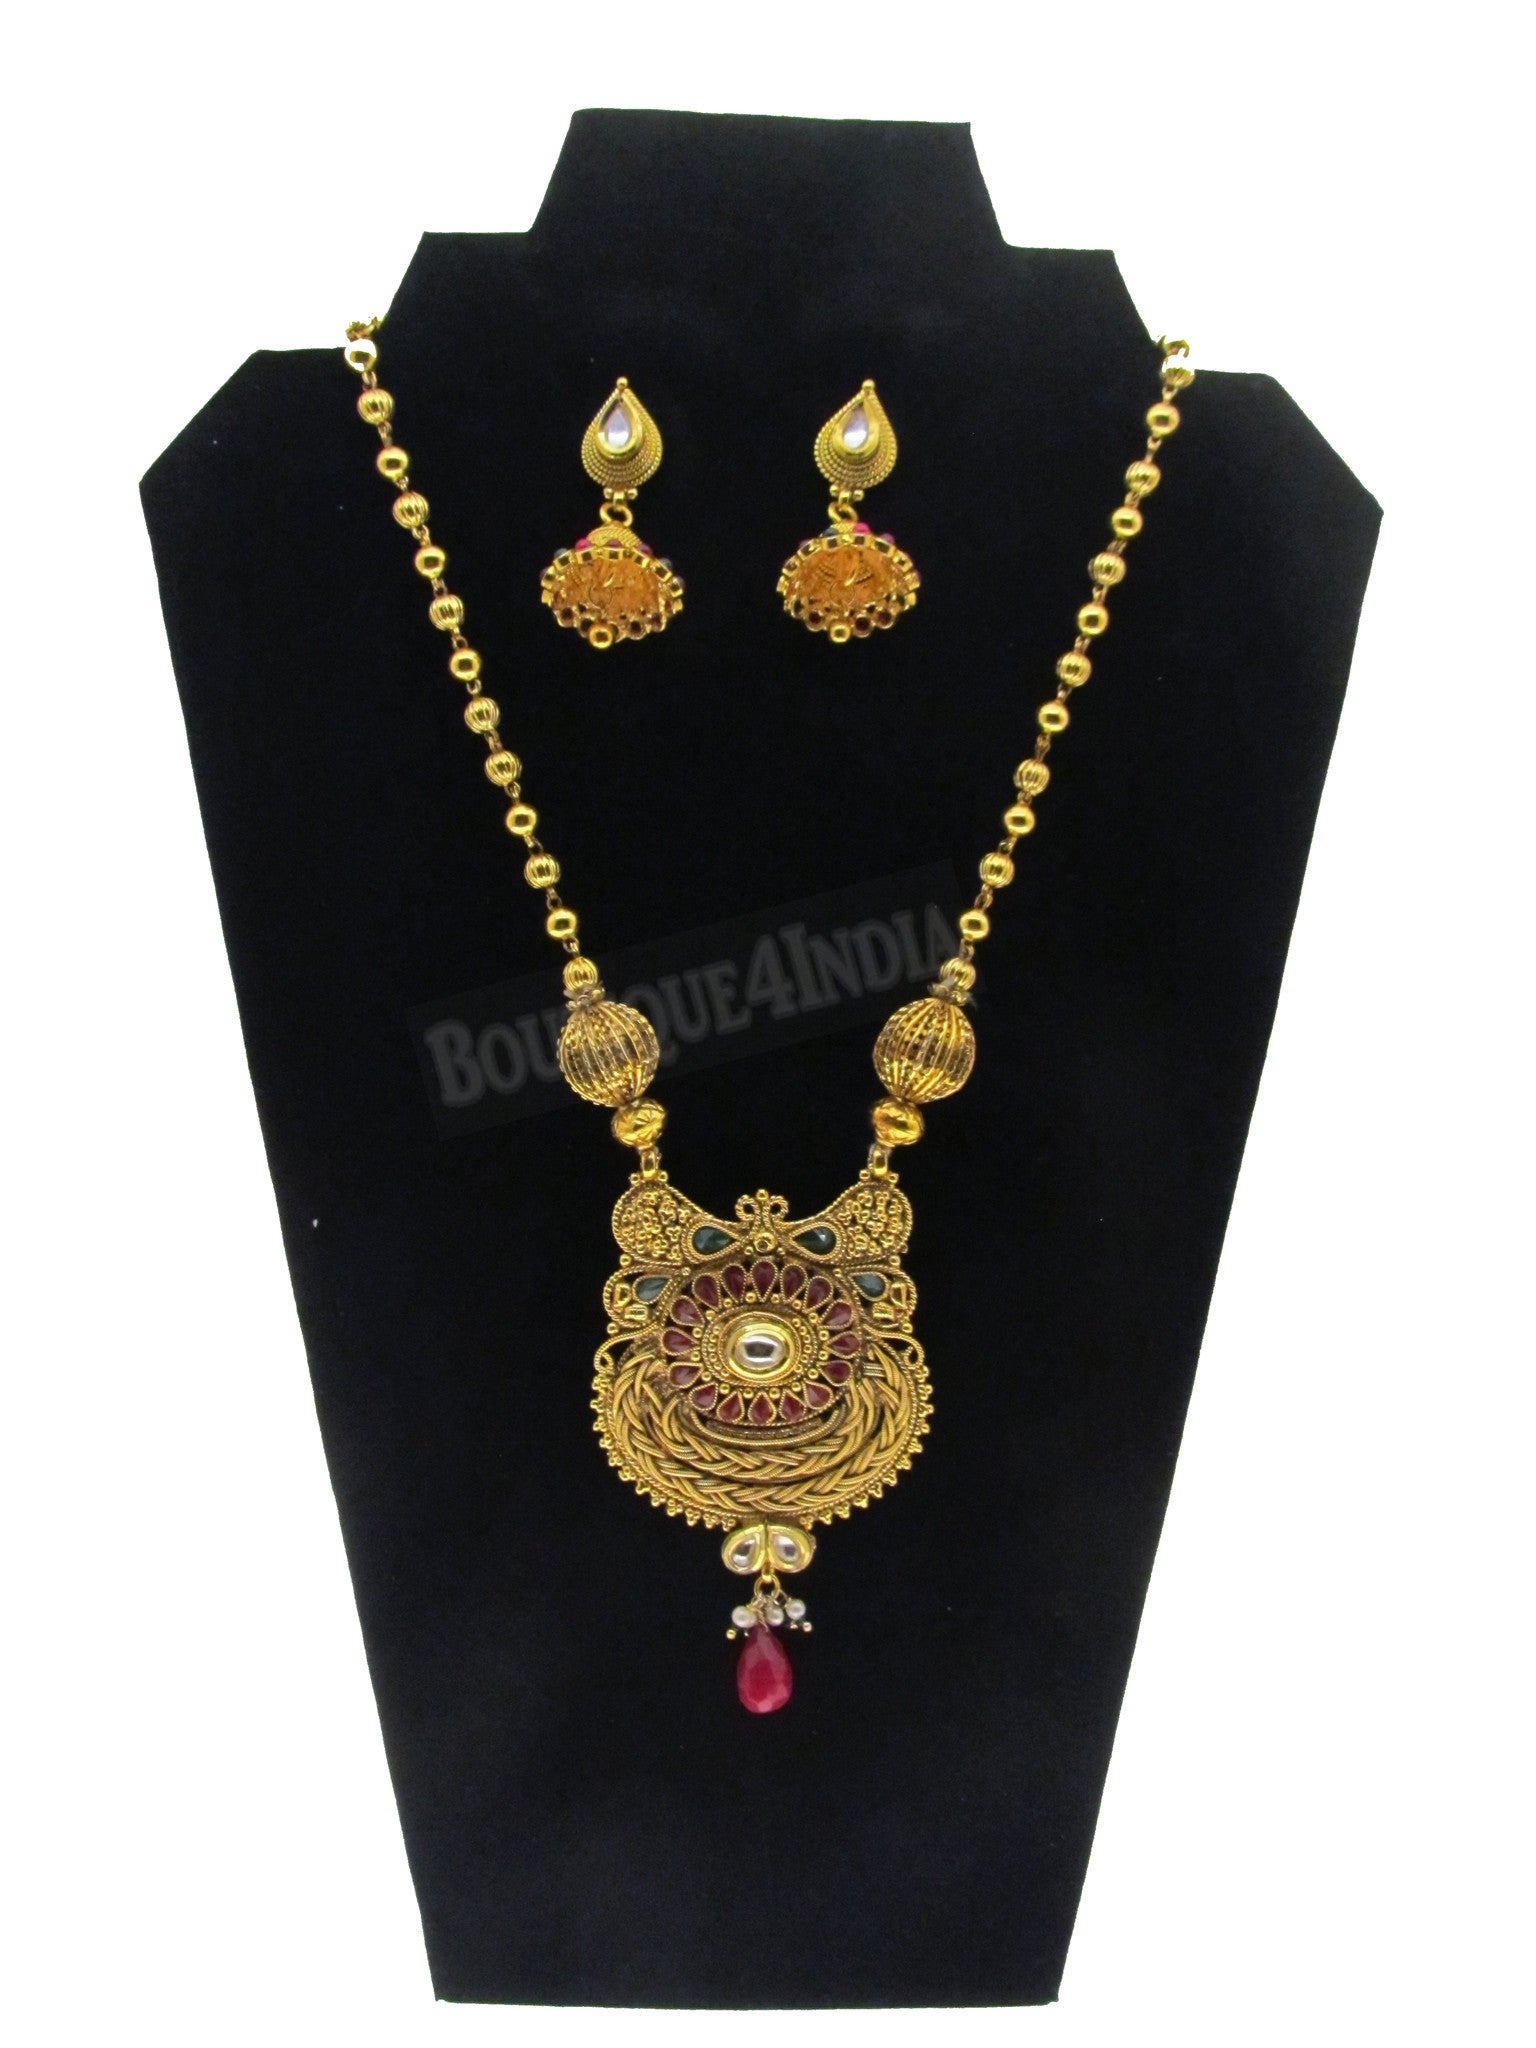 Kundan style designer 24 inches long Necklace with matching Earrings set